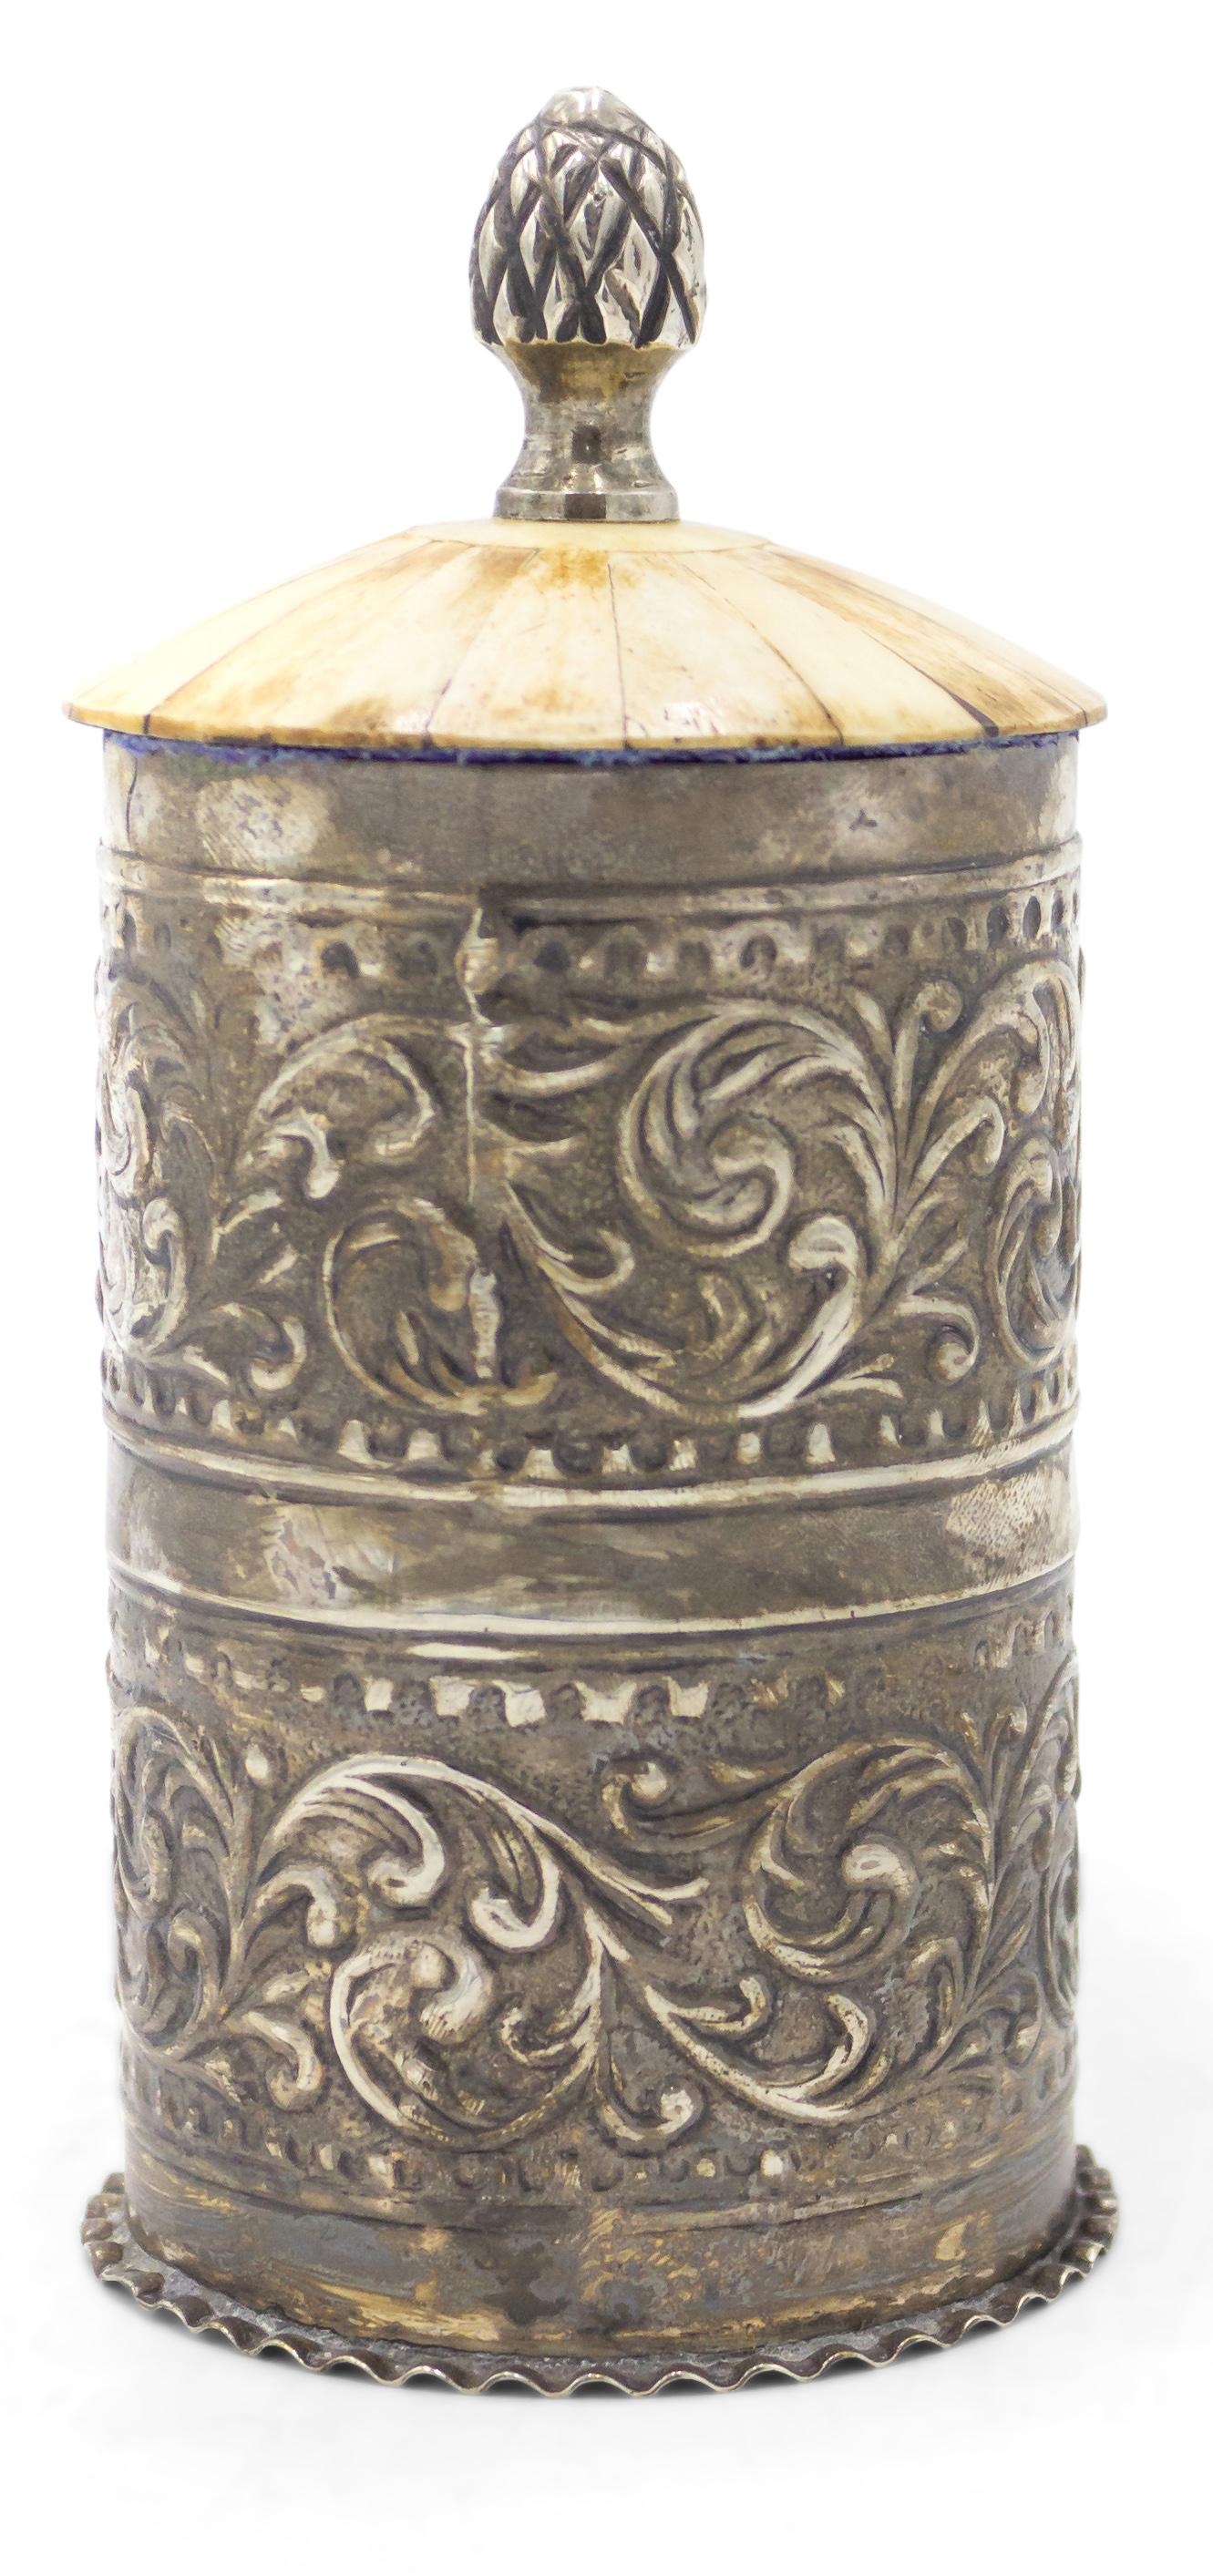 Pair of English Victorian-style (20th Century) hammered silver cylindrical shaped box with scroll design and veneered cover with acorn finial top. (stamped: Royal House) (priced as pair).
   